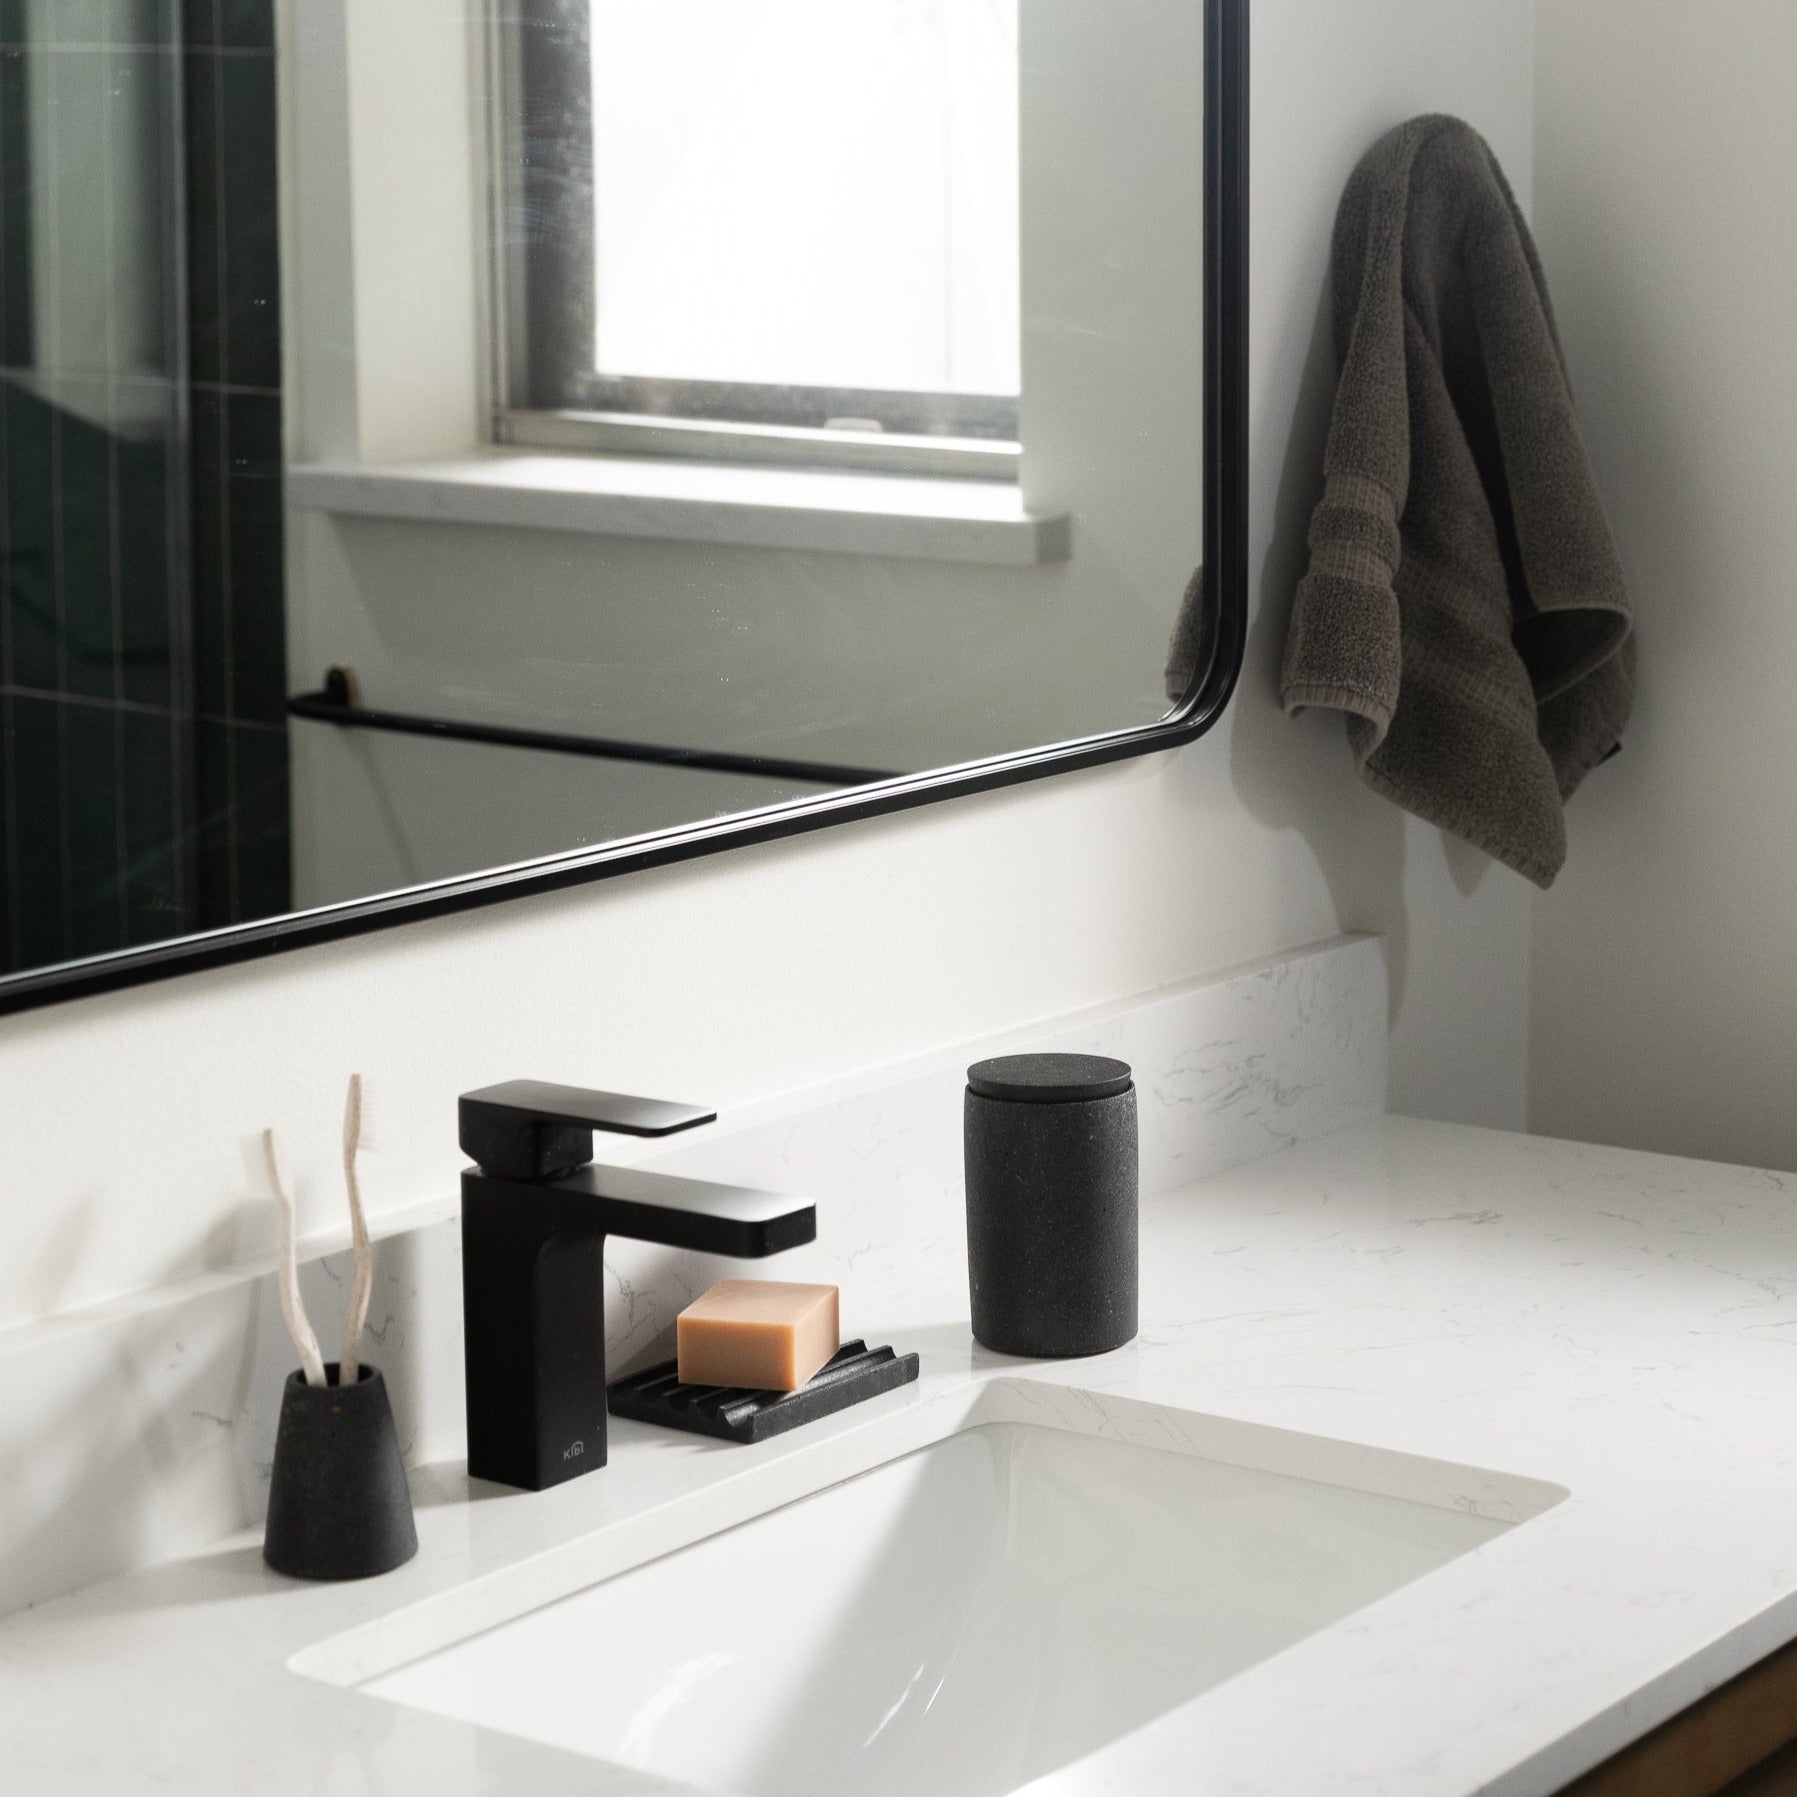 Toothbrush Holder in Black Terrazzo, styled by a sink.